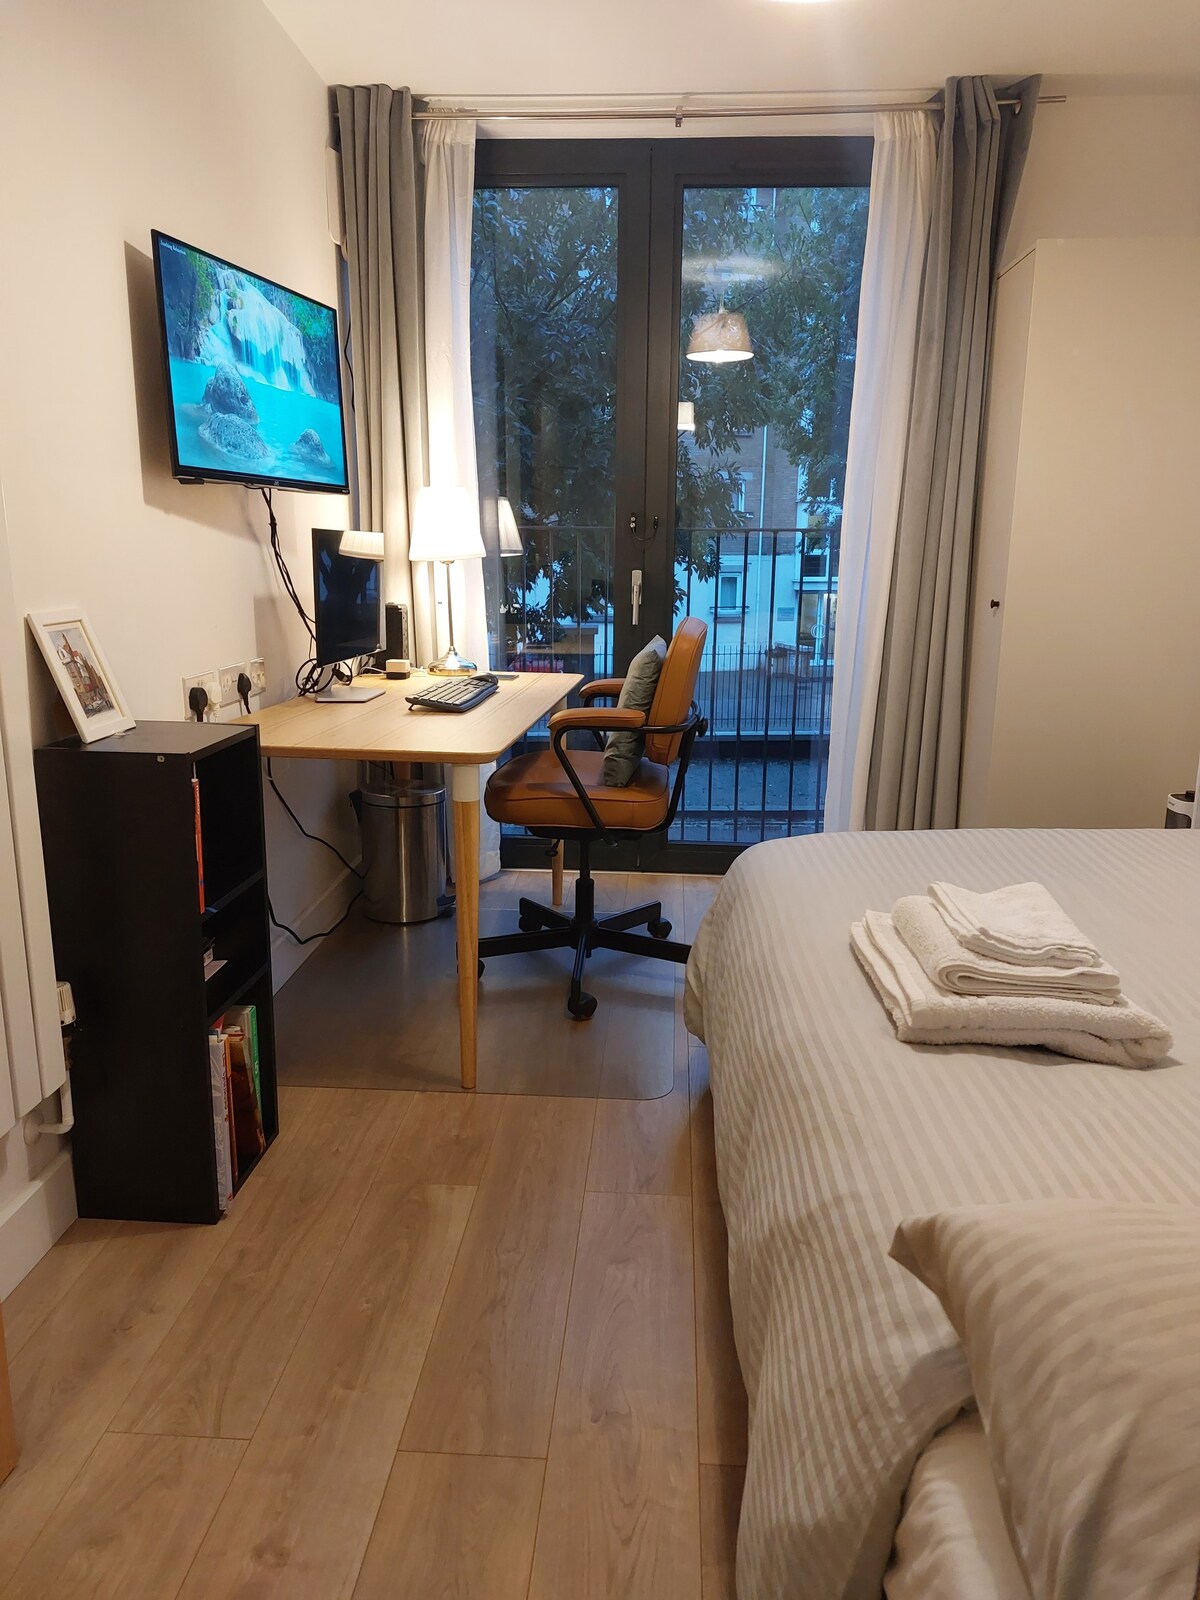 Room+own bathroom+ workspace+gym. 1 min from tube.